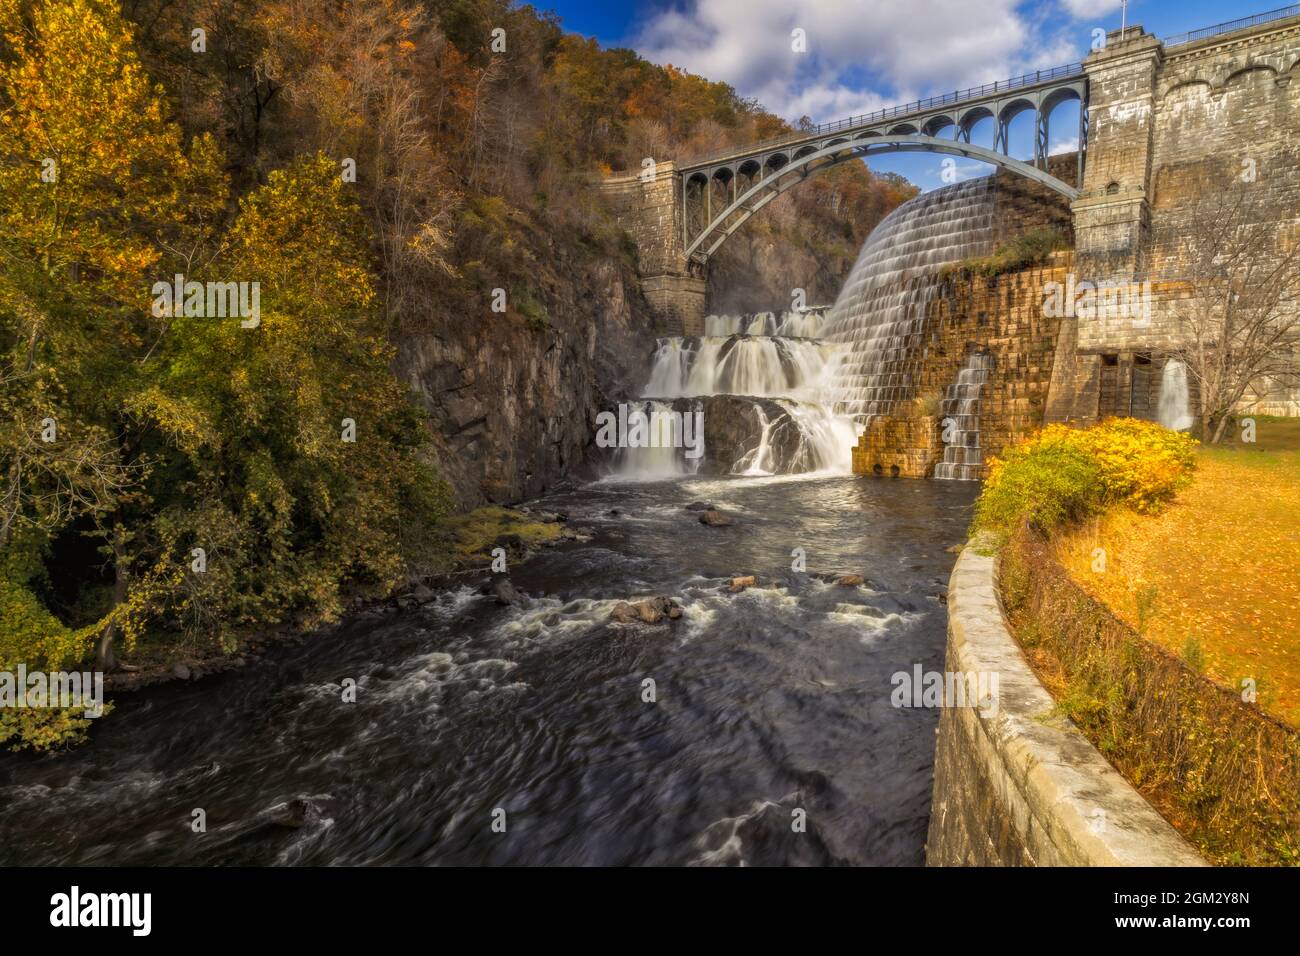 New Croton Hudson Dam   - New Croton Dam waterfall also known as the Cornell Dam during a beautiful autumn afternoon.  This image is available in colo Stock Photo